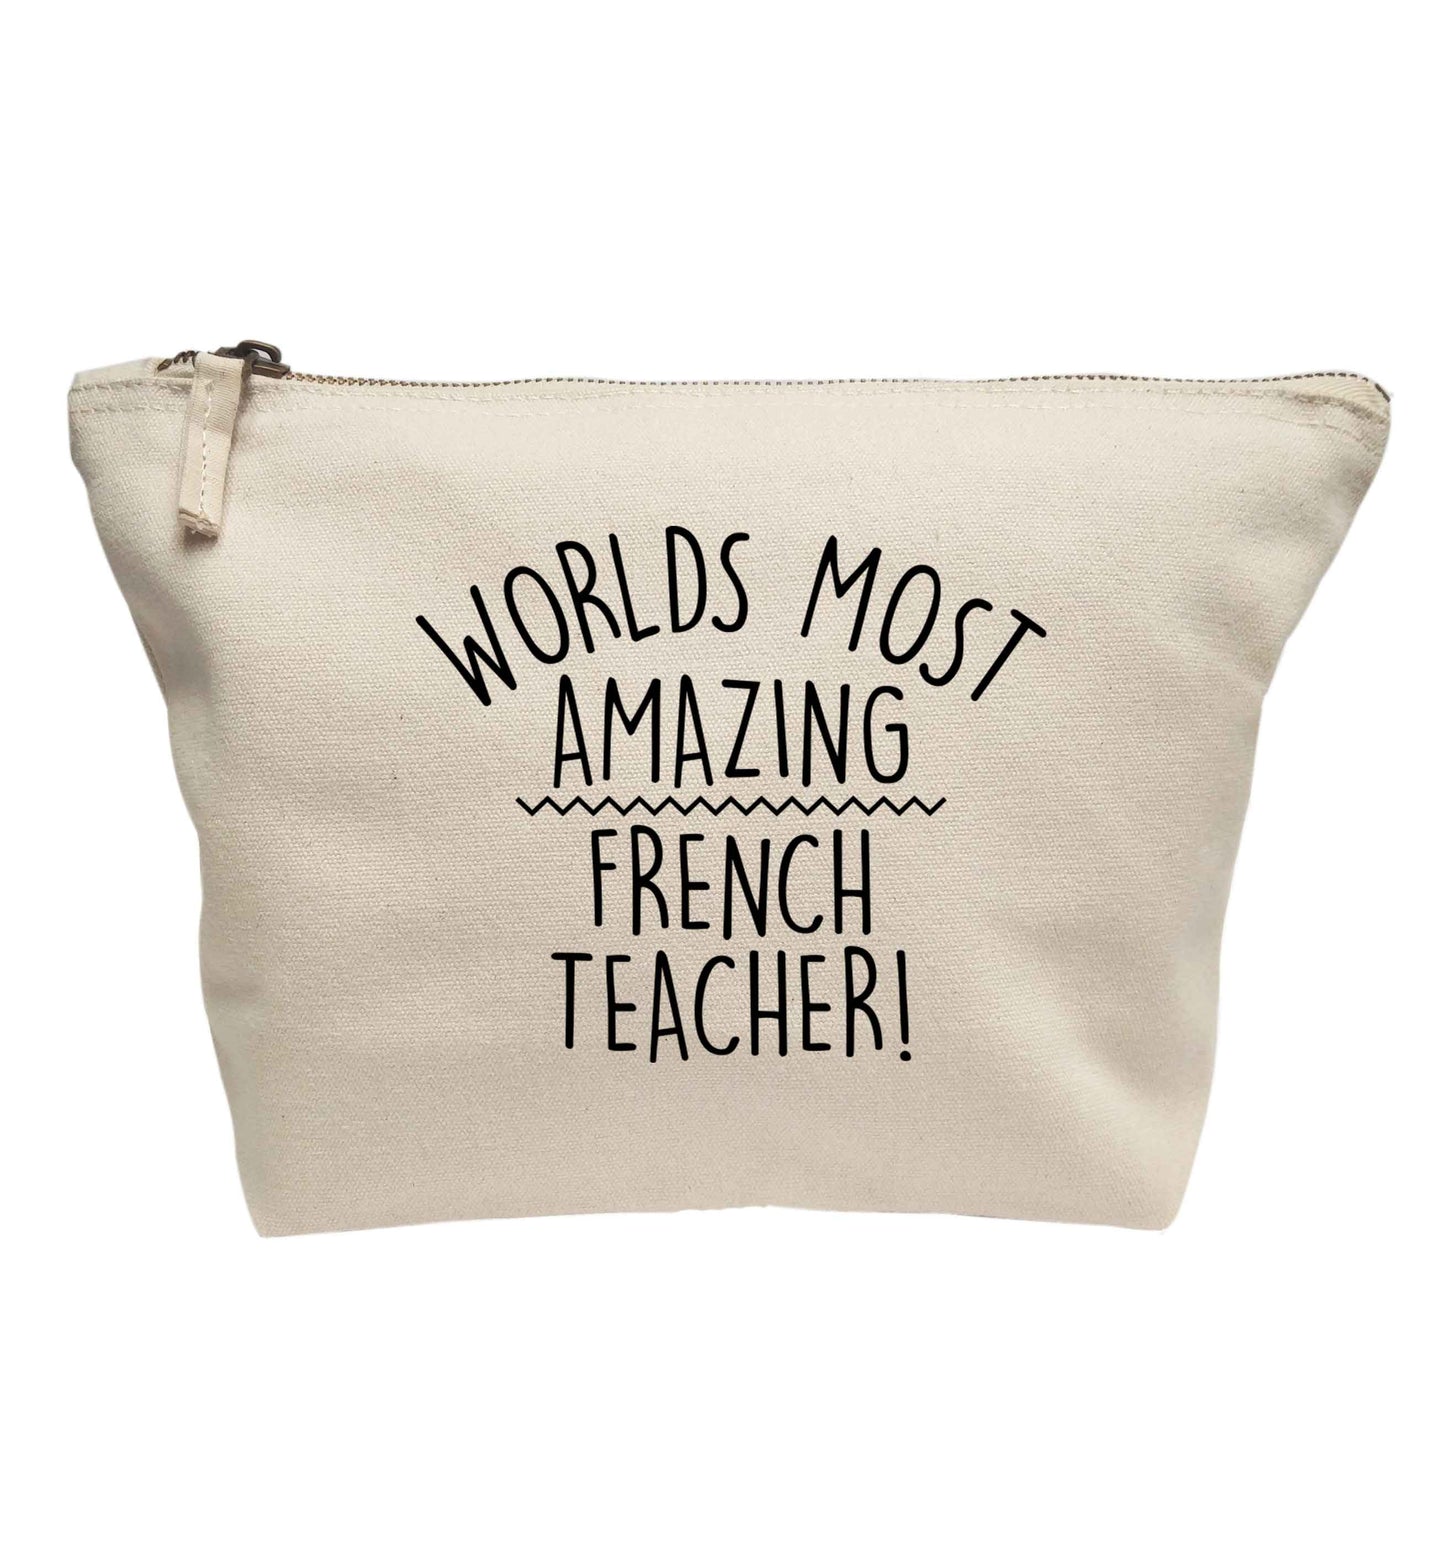 Worlds most amazing French teacher | Makeup / wash bag